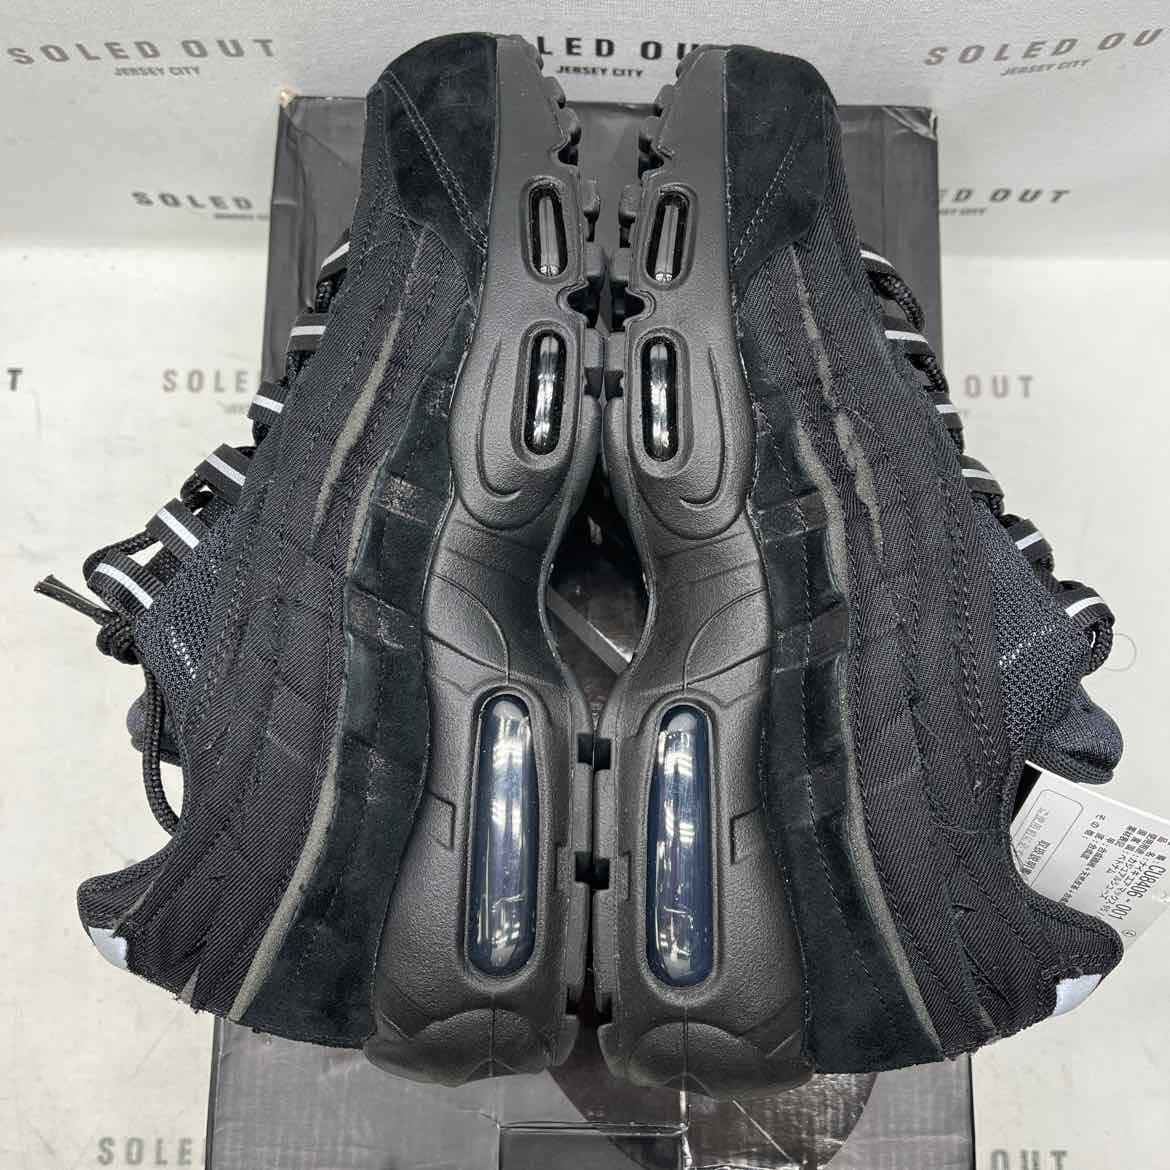 Nike Air Max 95 &quot;Cdg Black&quot; 2020 New Size 7